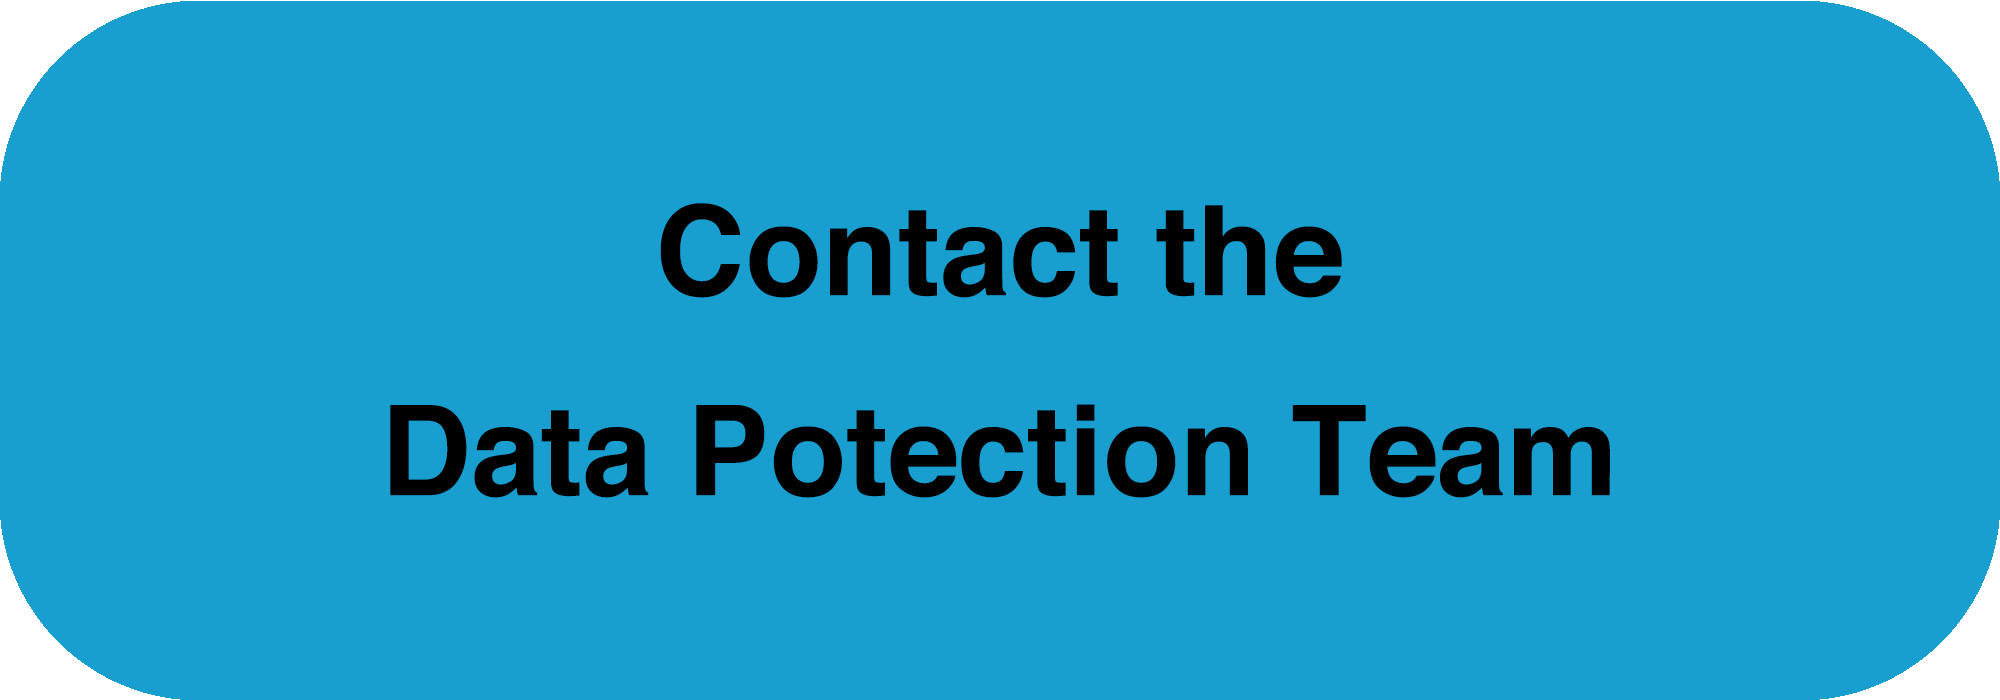 Contact the Data Protection team